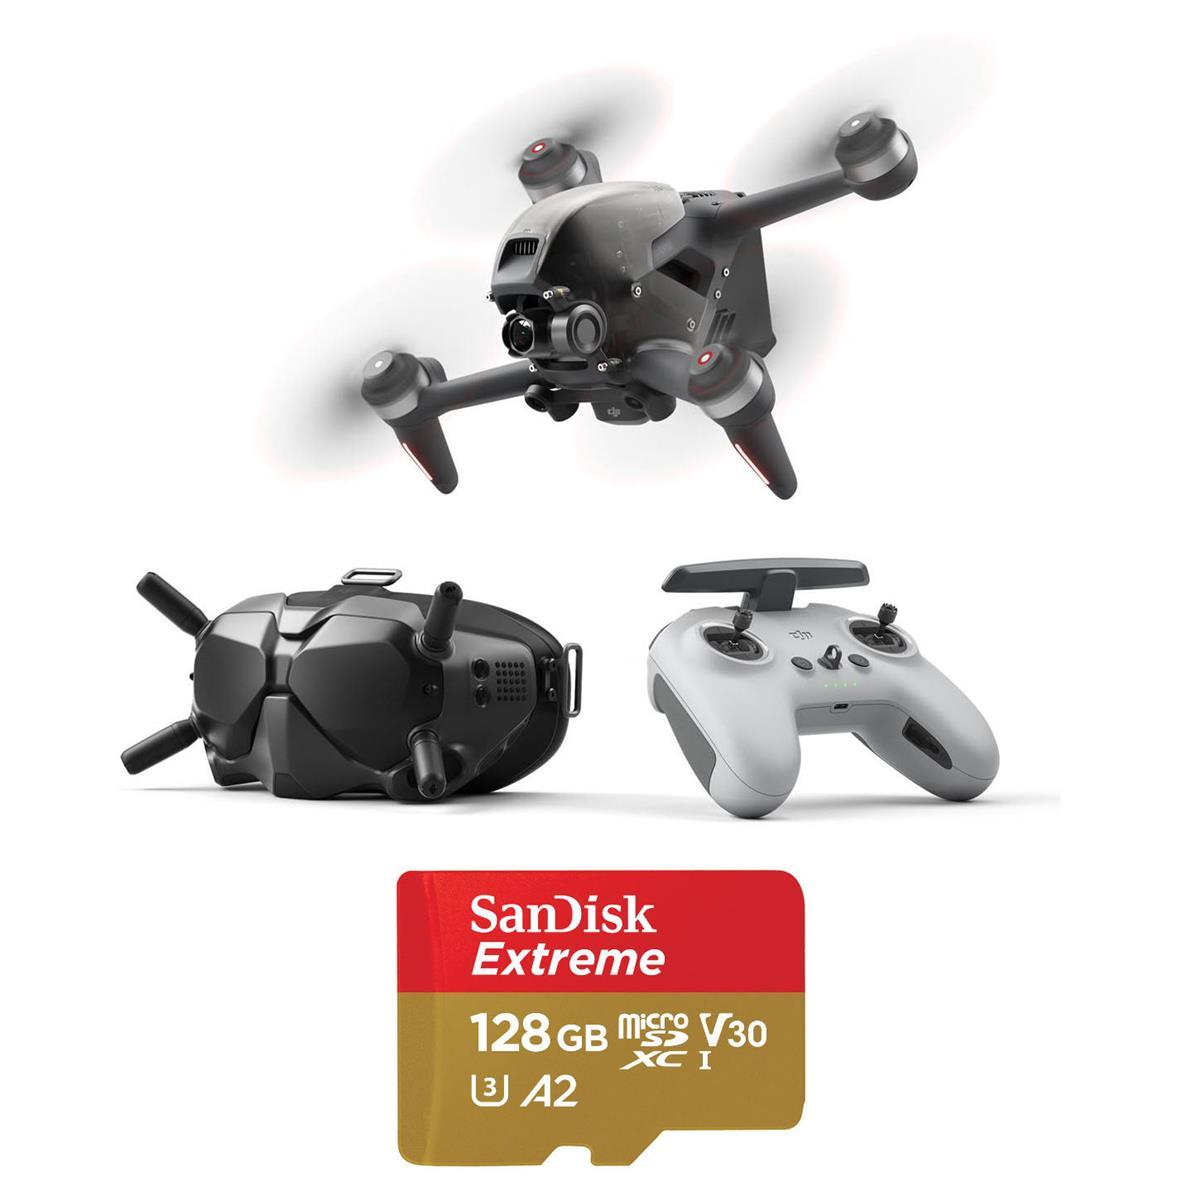 DJI FPV Drone Combo with 128GB microSD Memory Card for $999 Shipped